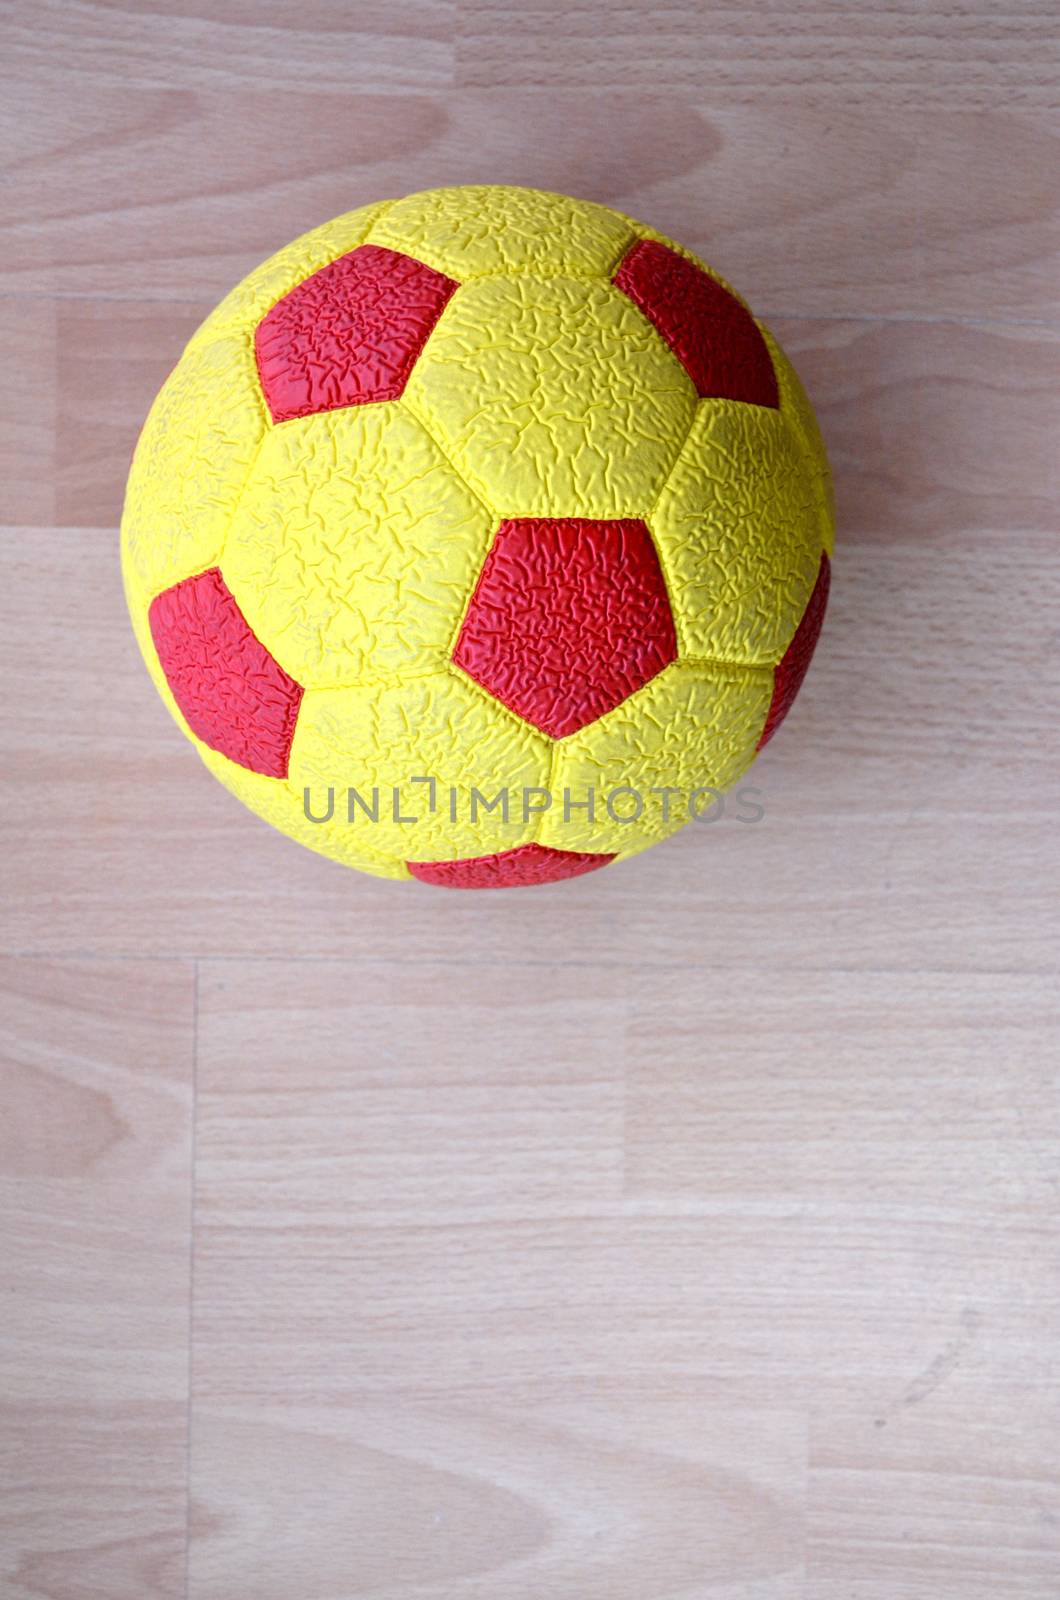 Red and yellow Soccer Ball on a wood by nehru